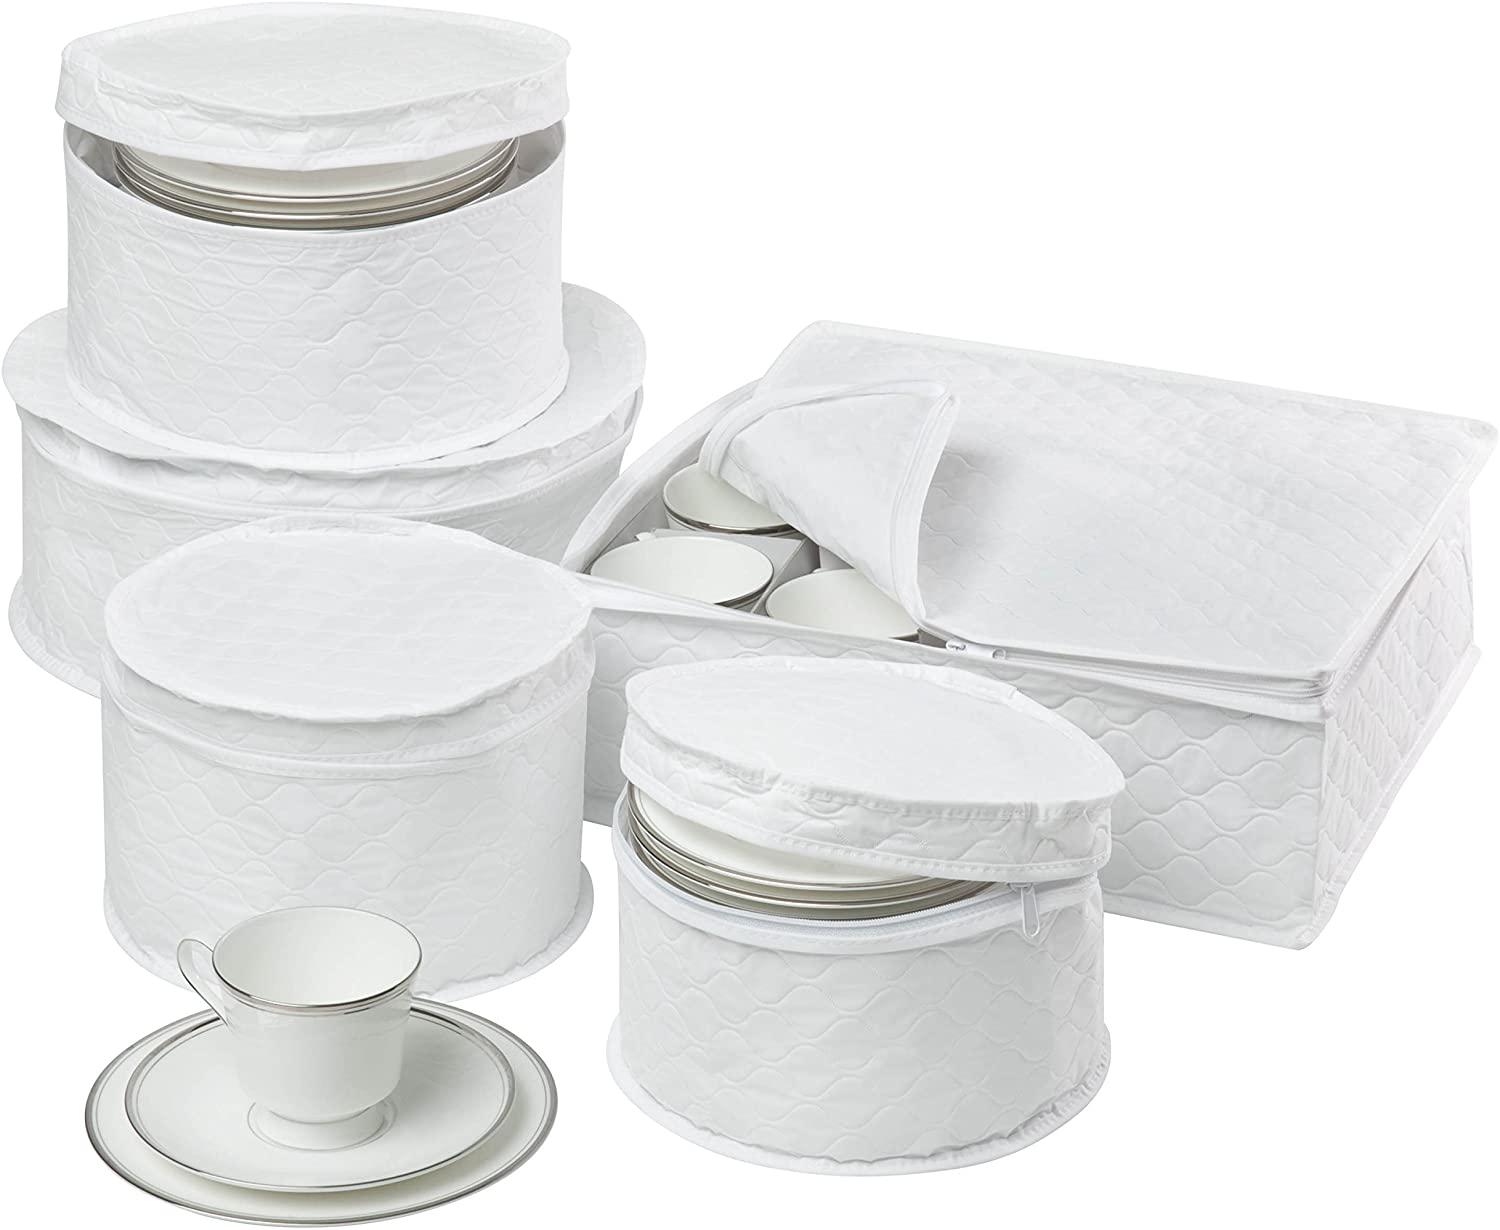 Honey-Can-Do SFT-01630 Cushioned Quilted Dinnerware Storage Set, 5-Piece